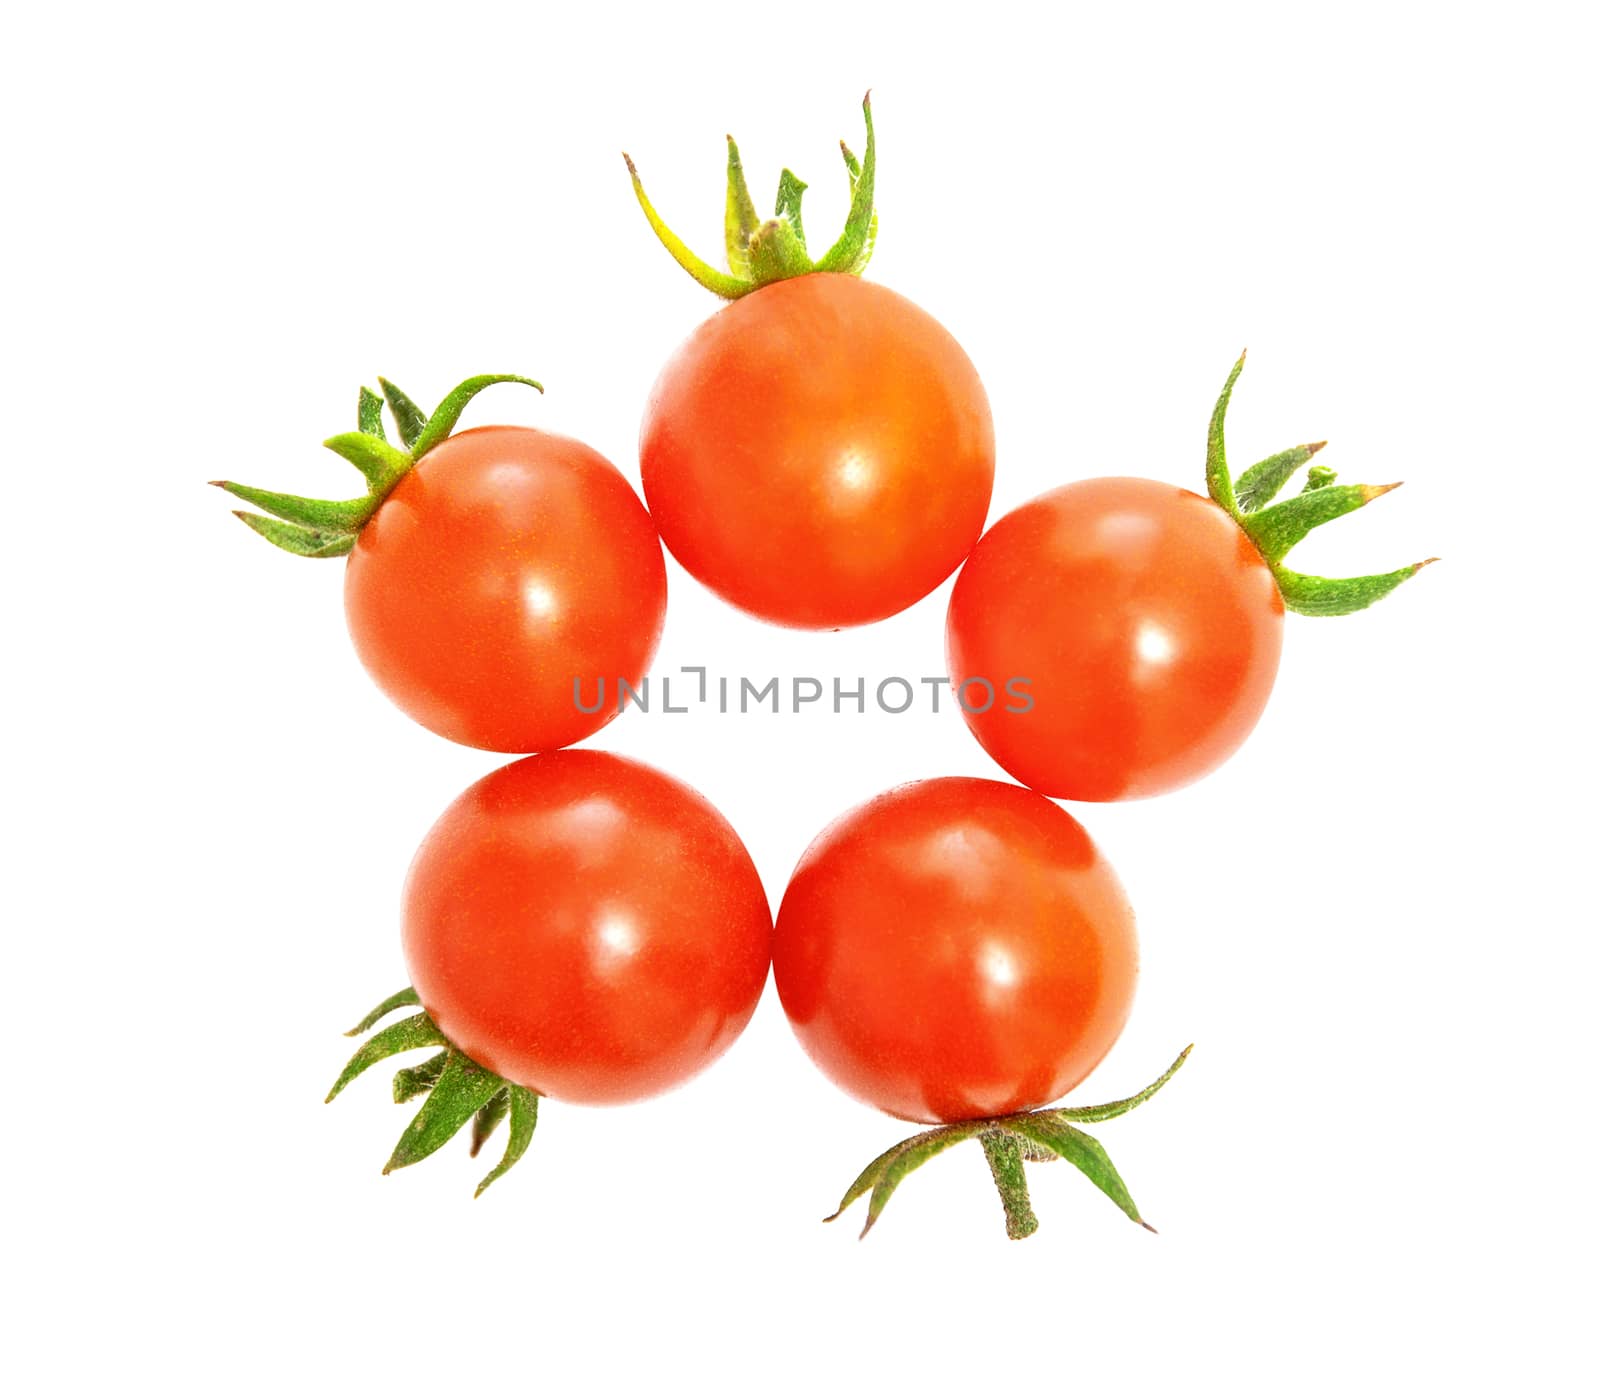 Ripe red cherry tomatoes isolated on a white background.